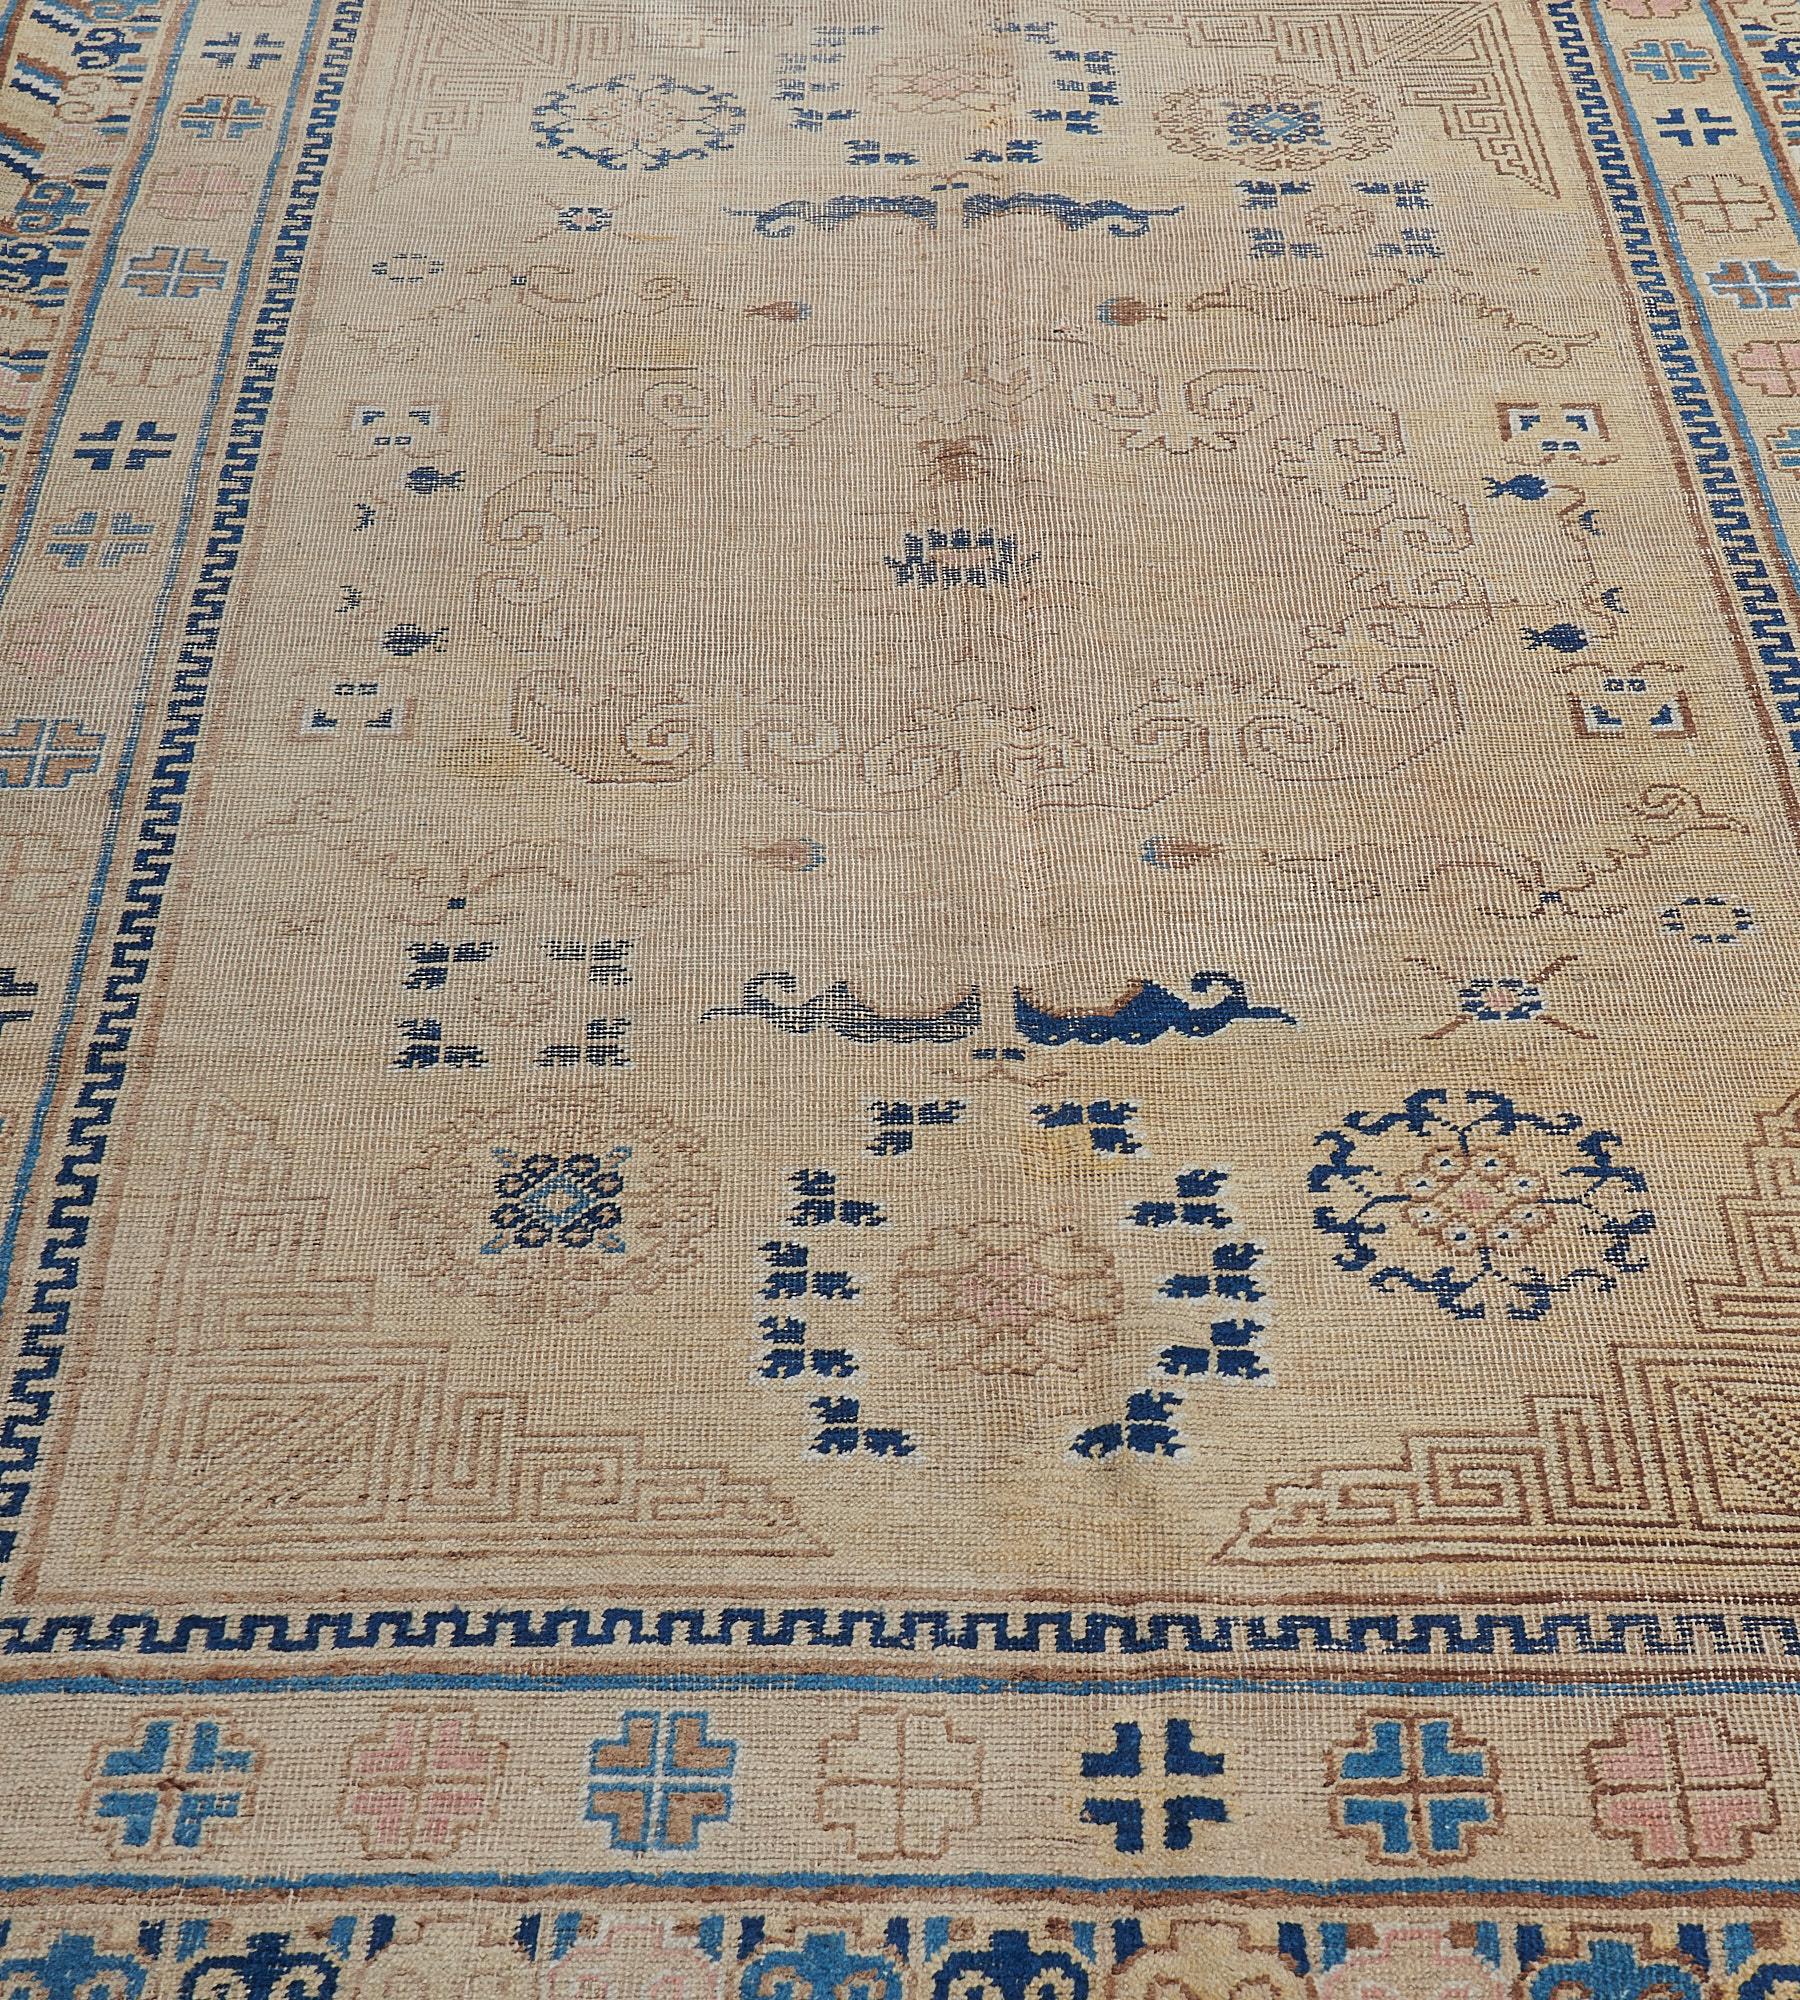 This antique Samarkand Khotan rug from East Turkistan, circa 1880, has faded-gold field with a large hooked shaded aubergine medallion surrounded by indigo blue rosettes, cloud motifs and auspicious symbols, a shaded aubergine key-pattern spandrel